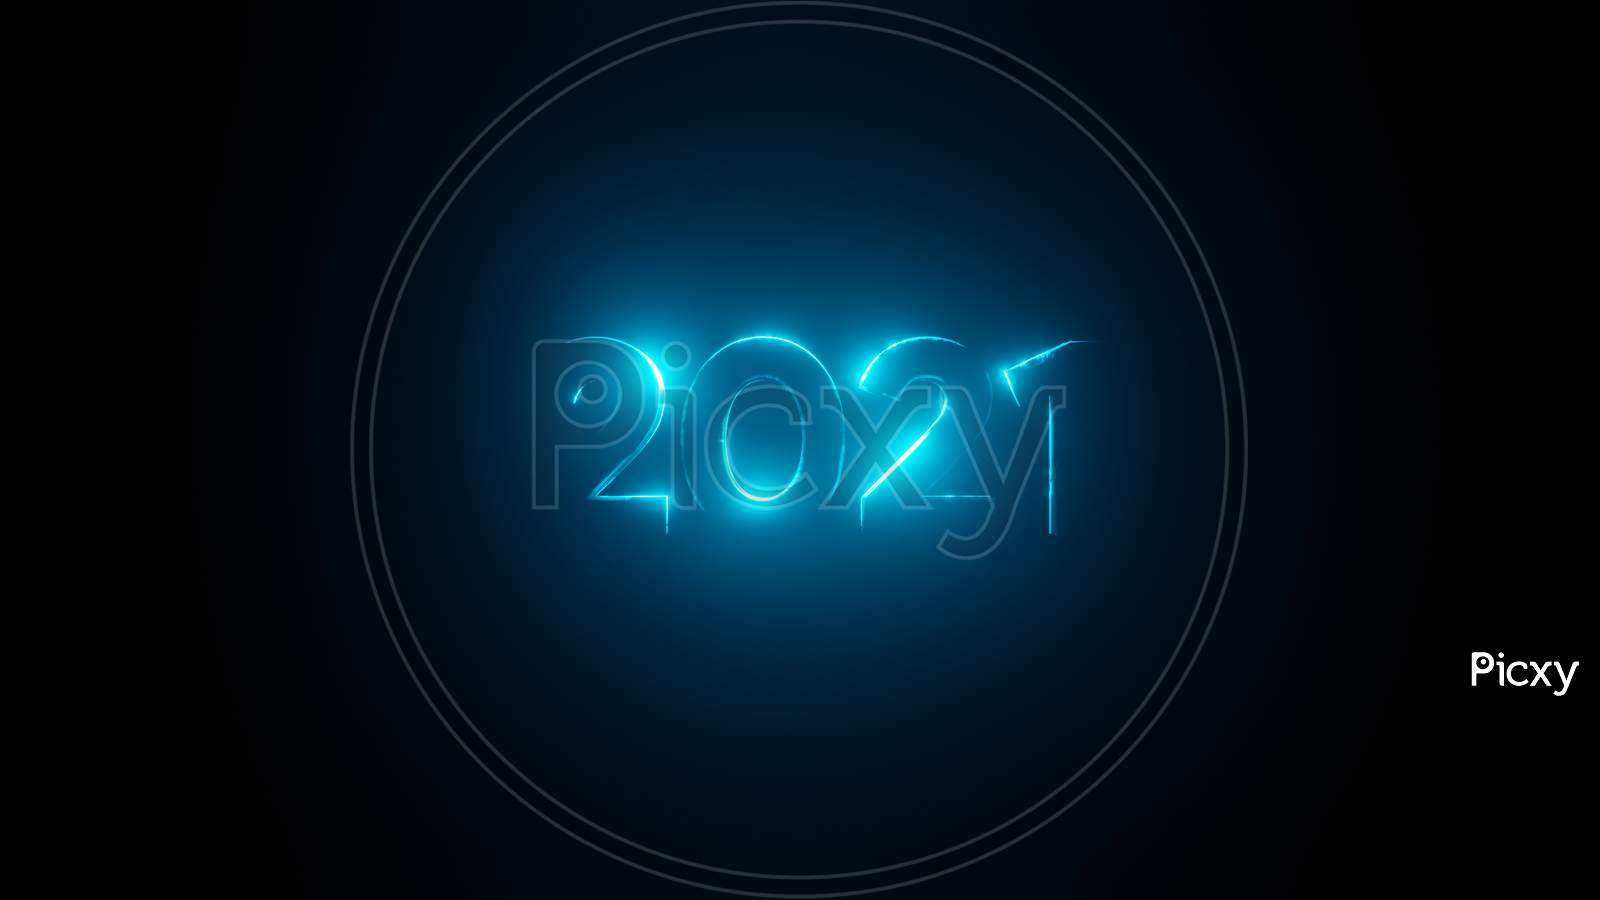 2021 happy new year background with metallic blue with light effect colored numbers . 3d illustration rendering